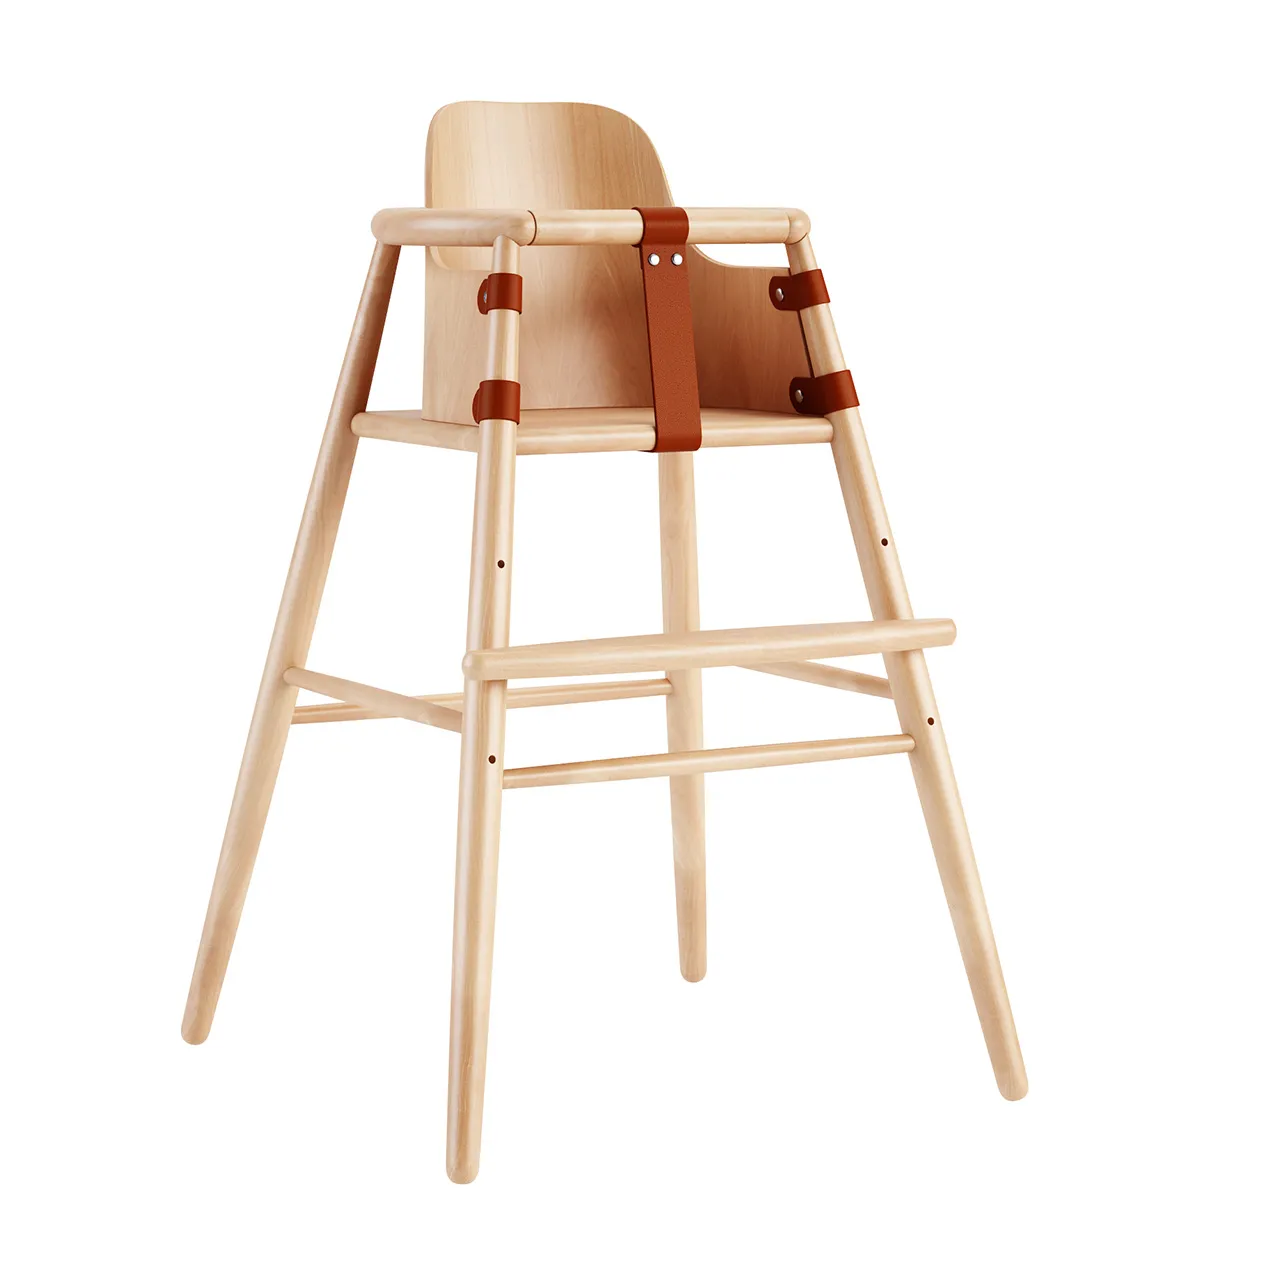 Kids – nd54-high-chair-baby-seat-with-backrest-by-carl-hansen